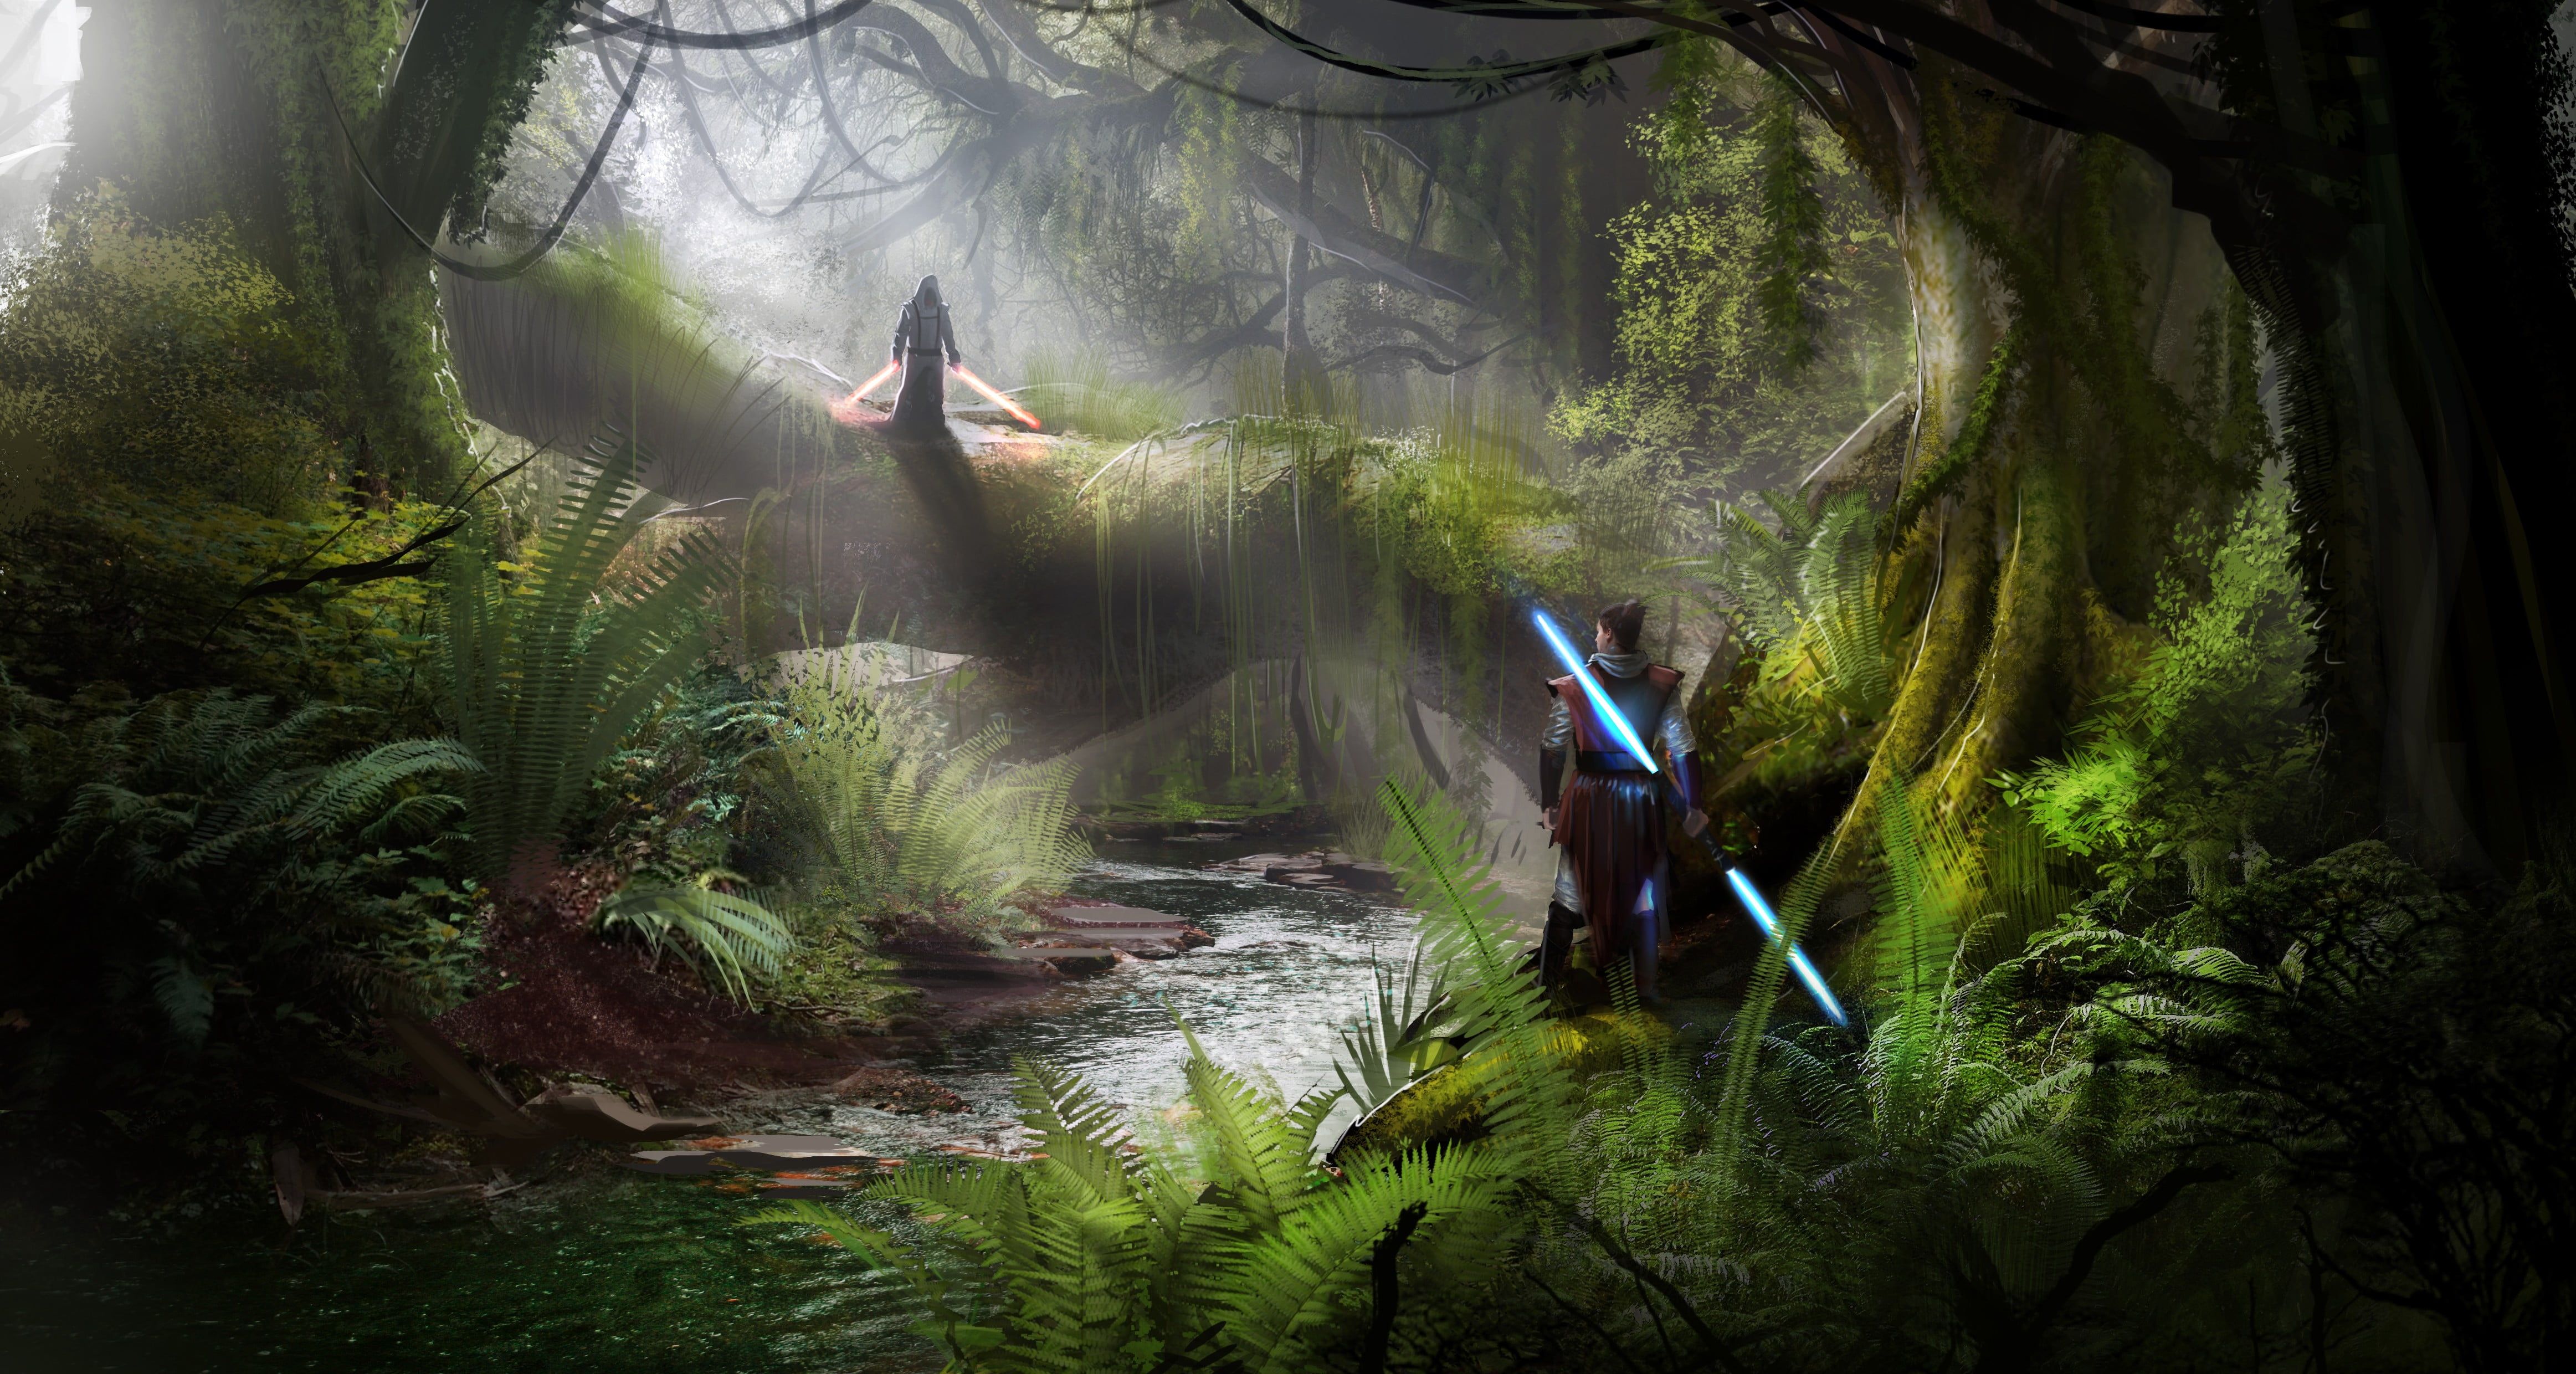 forest wallpaper #Jedi #lightsaber #Sith #forest K #wallpaper #hdwallpaper #desktop. Forest wallpaper, Sith, Star wars characters wallpaper